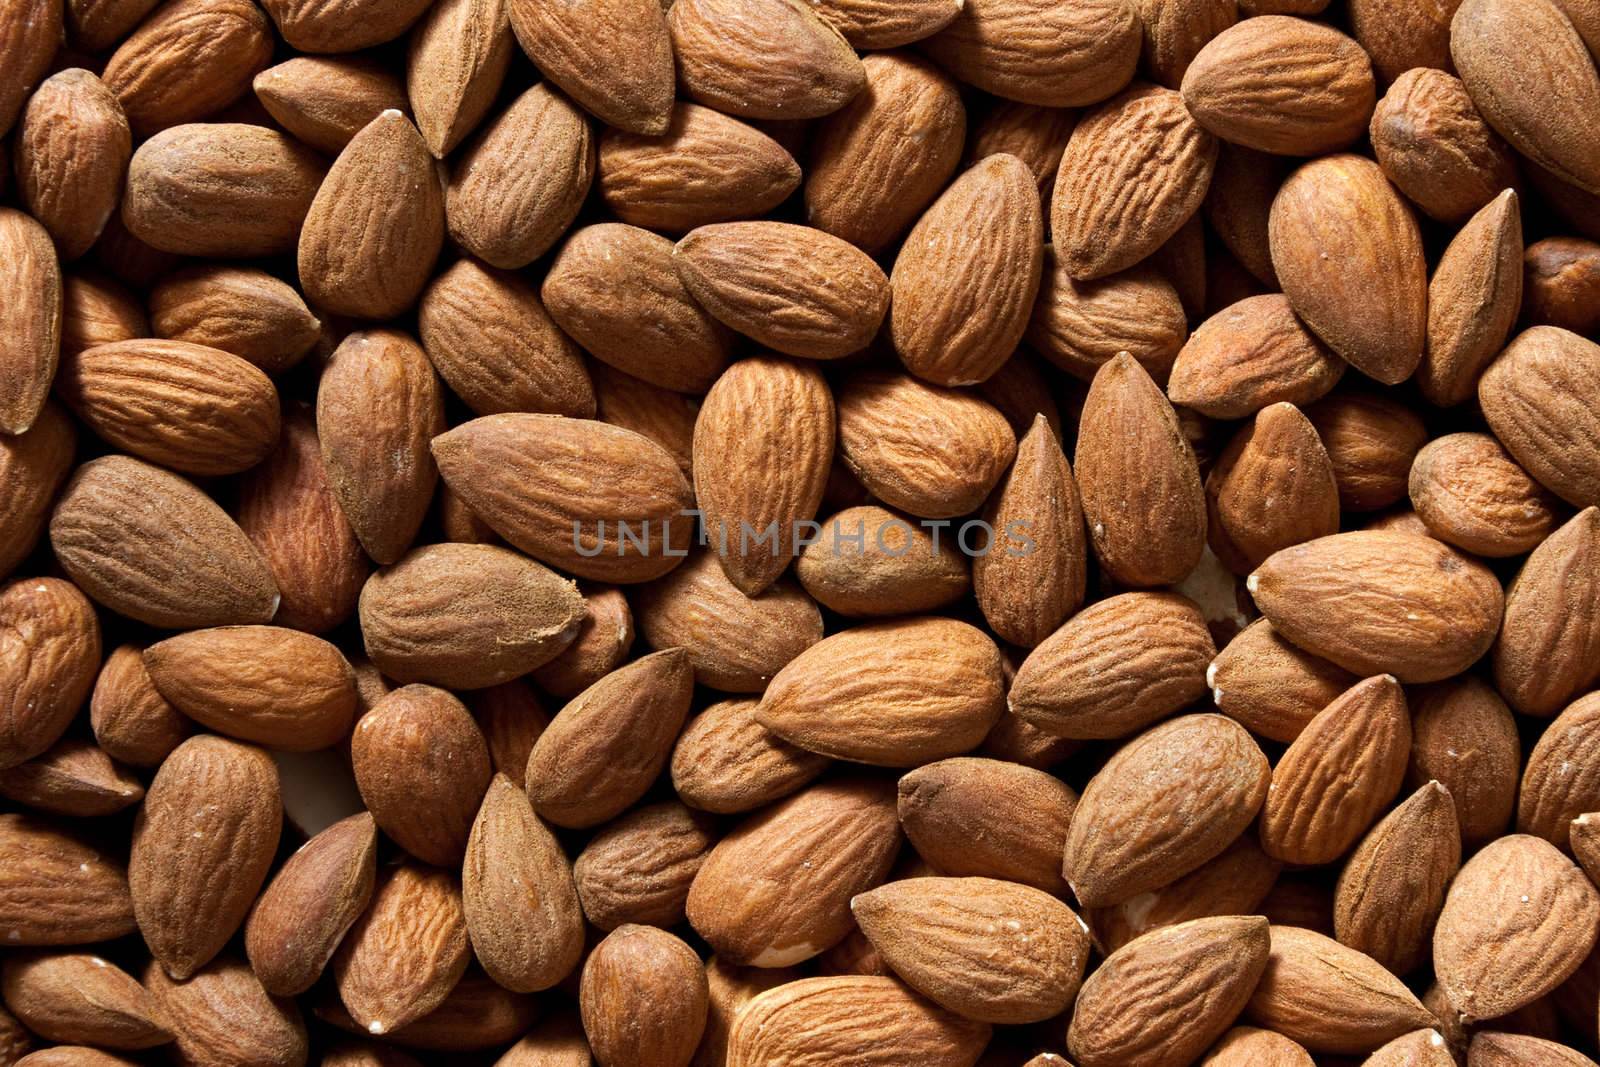 Raw, dried, and shelled almonds: top view